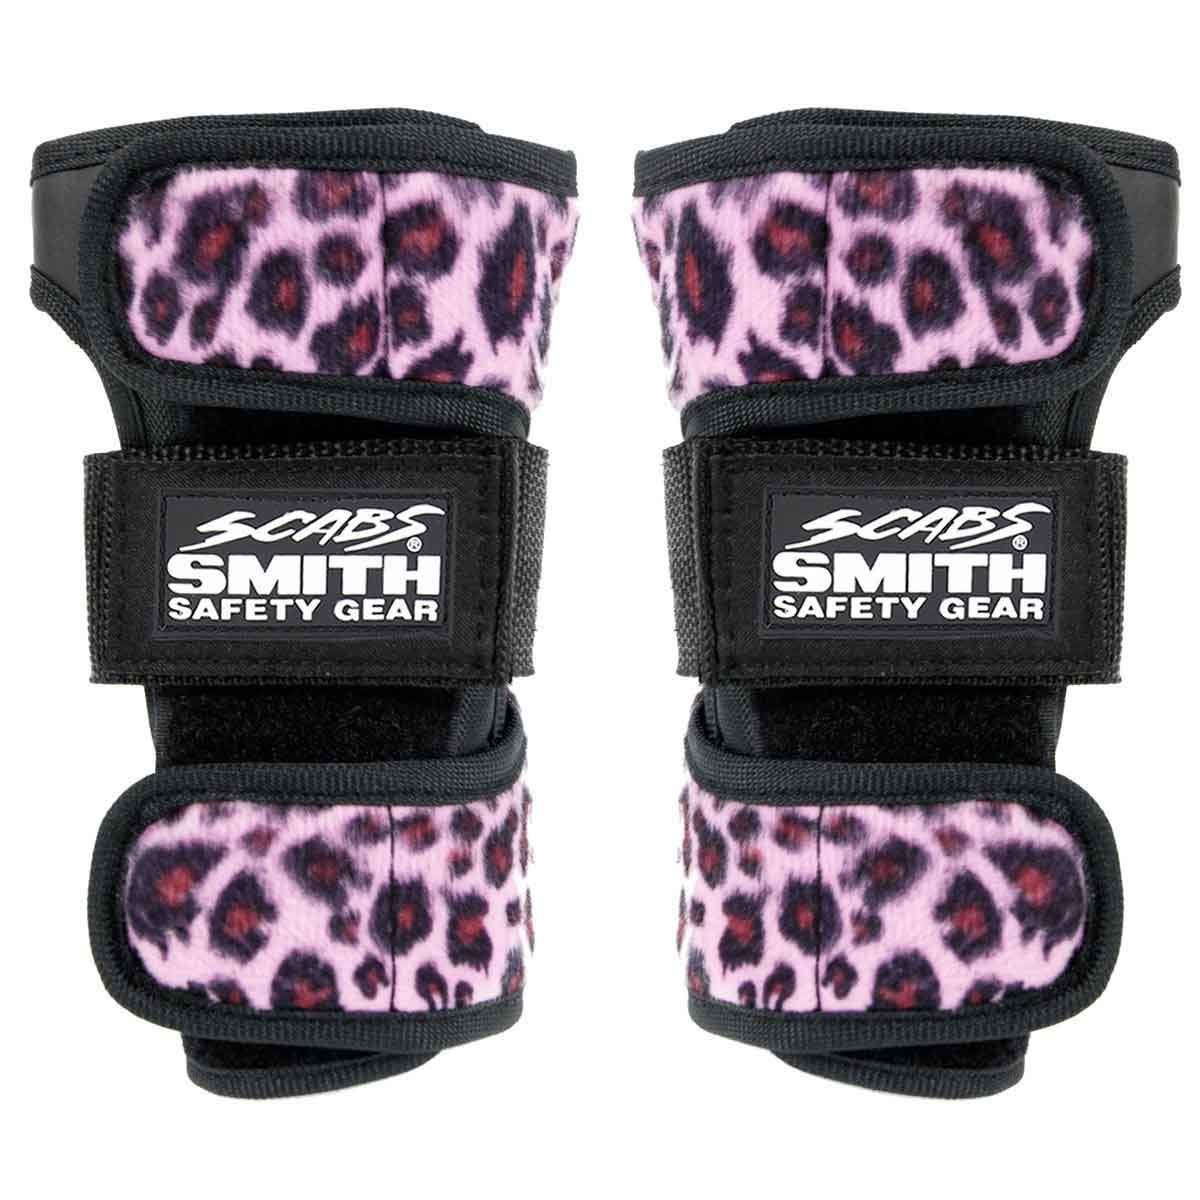 Smith Safety Gear Scabs Wrist Guards 